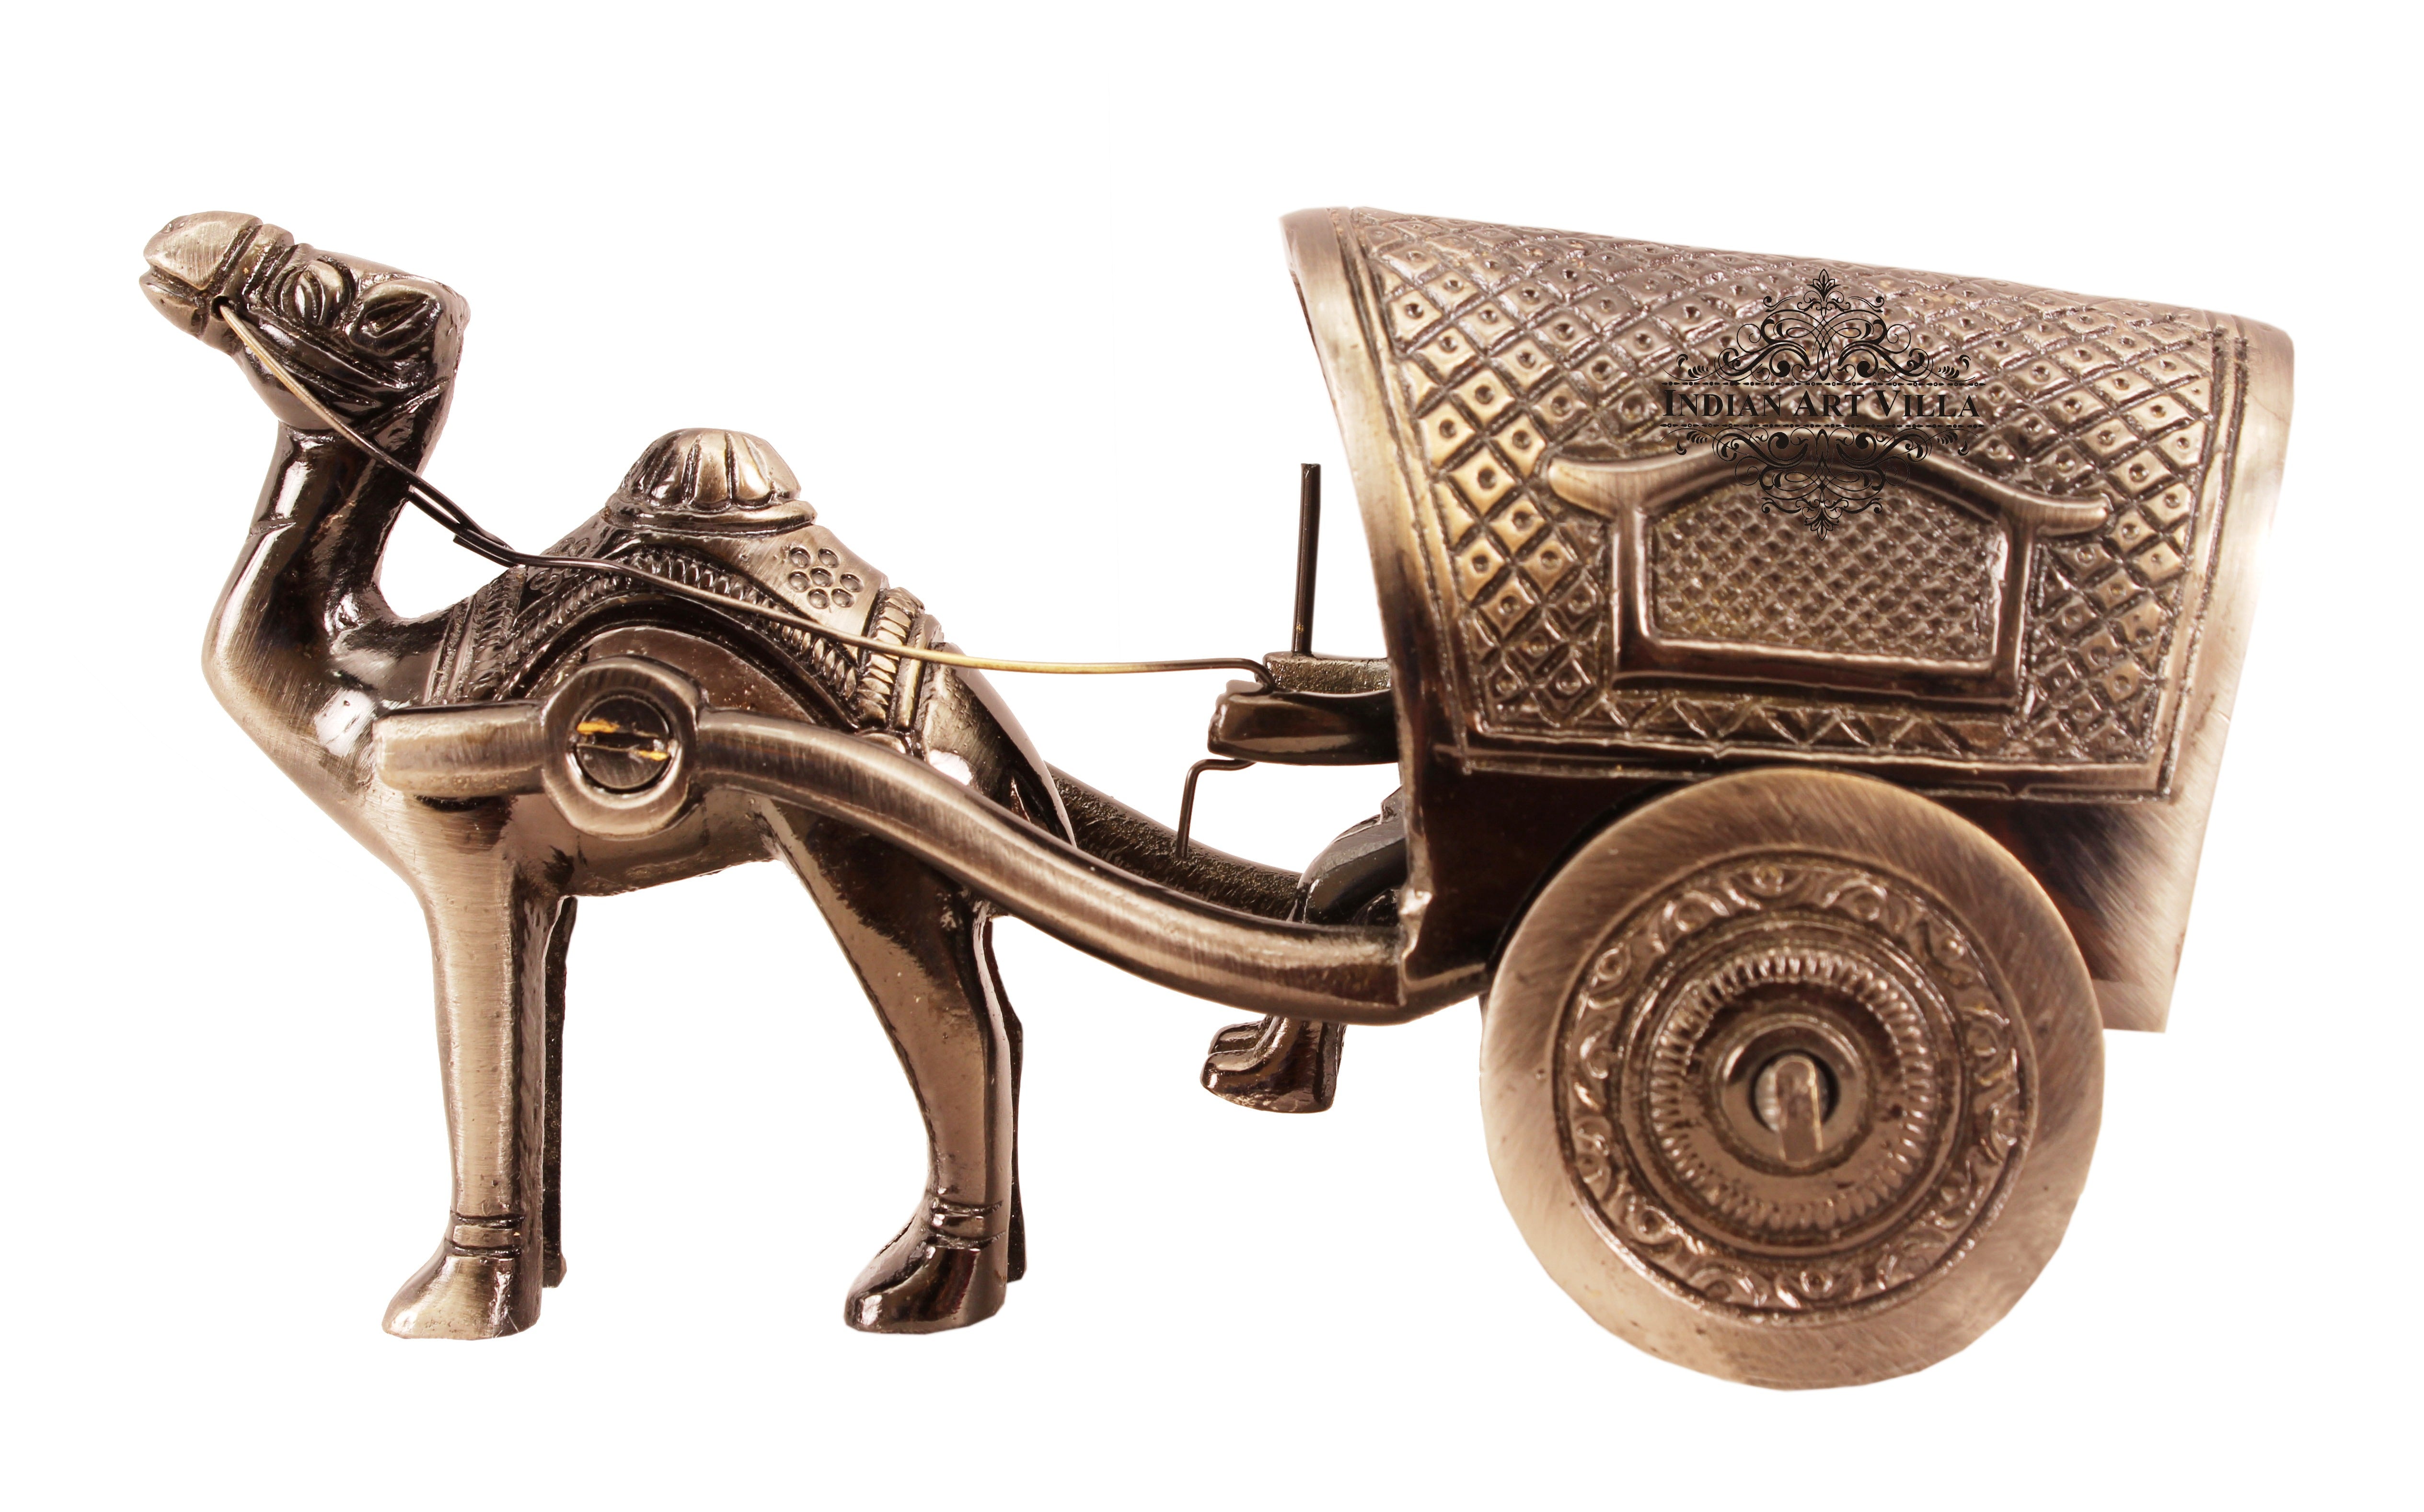 Buy Indian Art Villa Brass Handcrafted Cart With Two Bull Showpiece Figurine,  Home Hotel Office Decorative Item, Size-5.5x11.5 cm Online - Indian Art  Villa